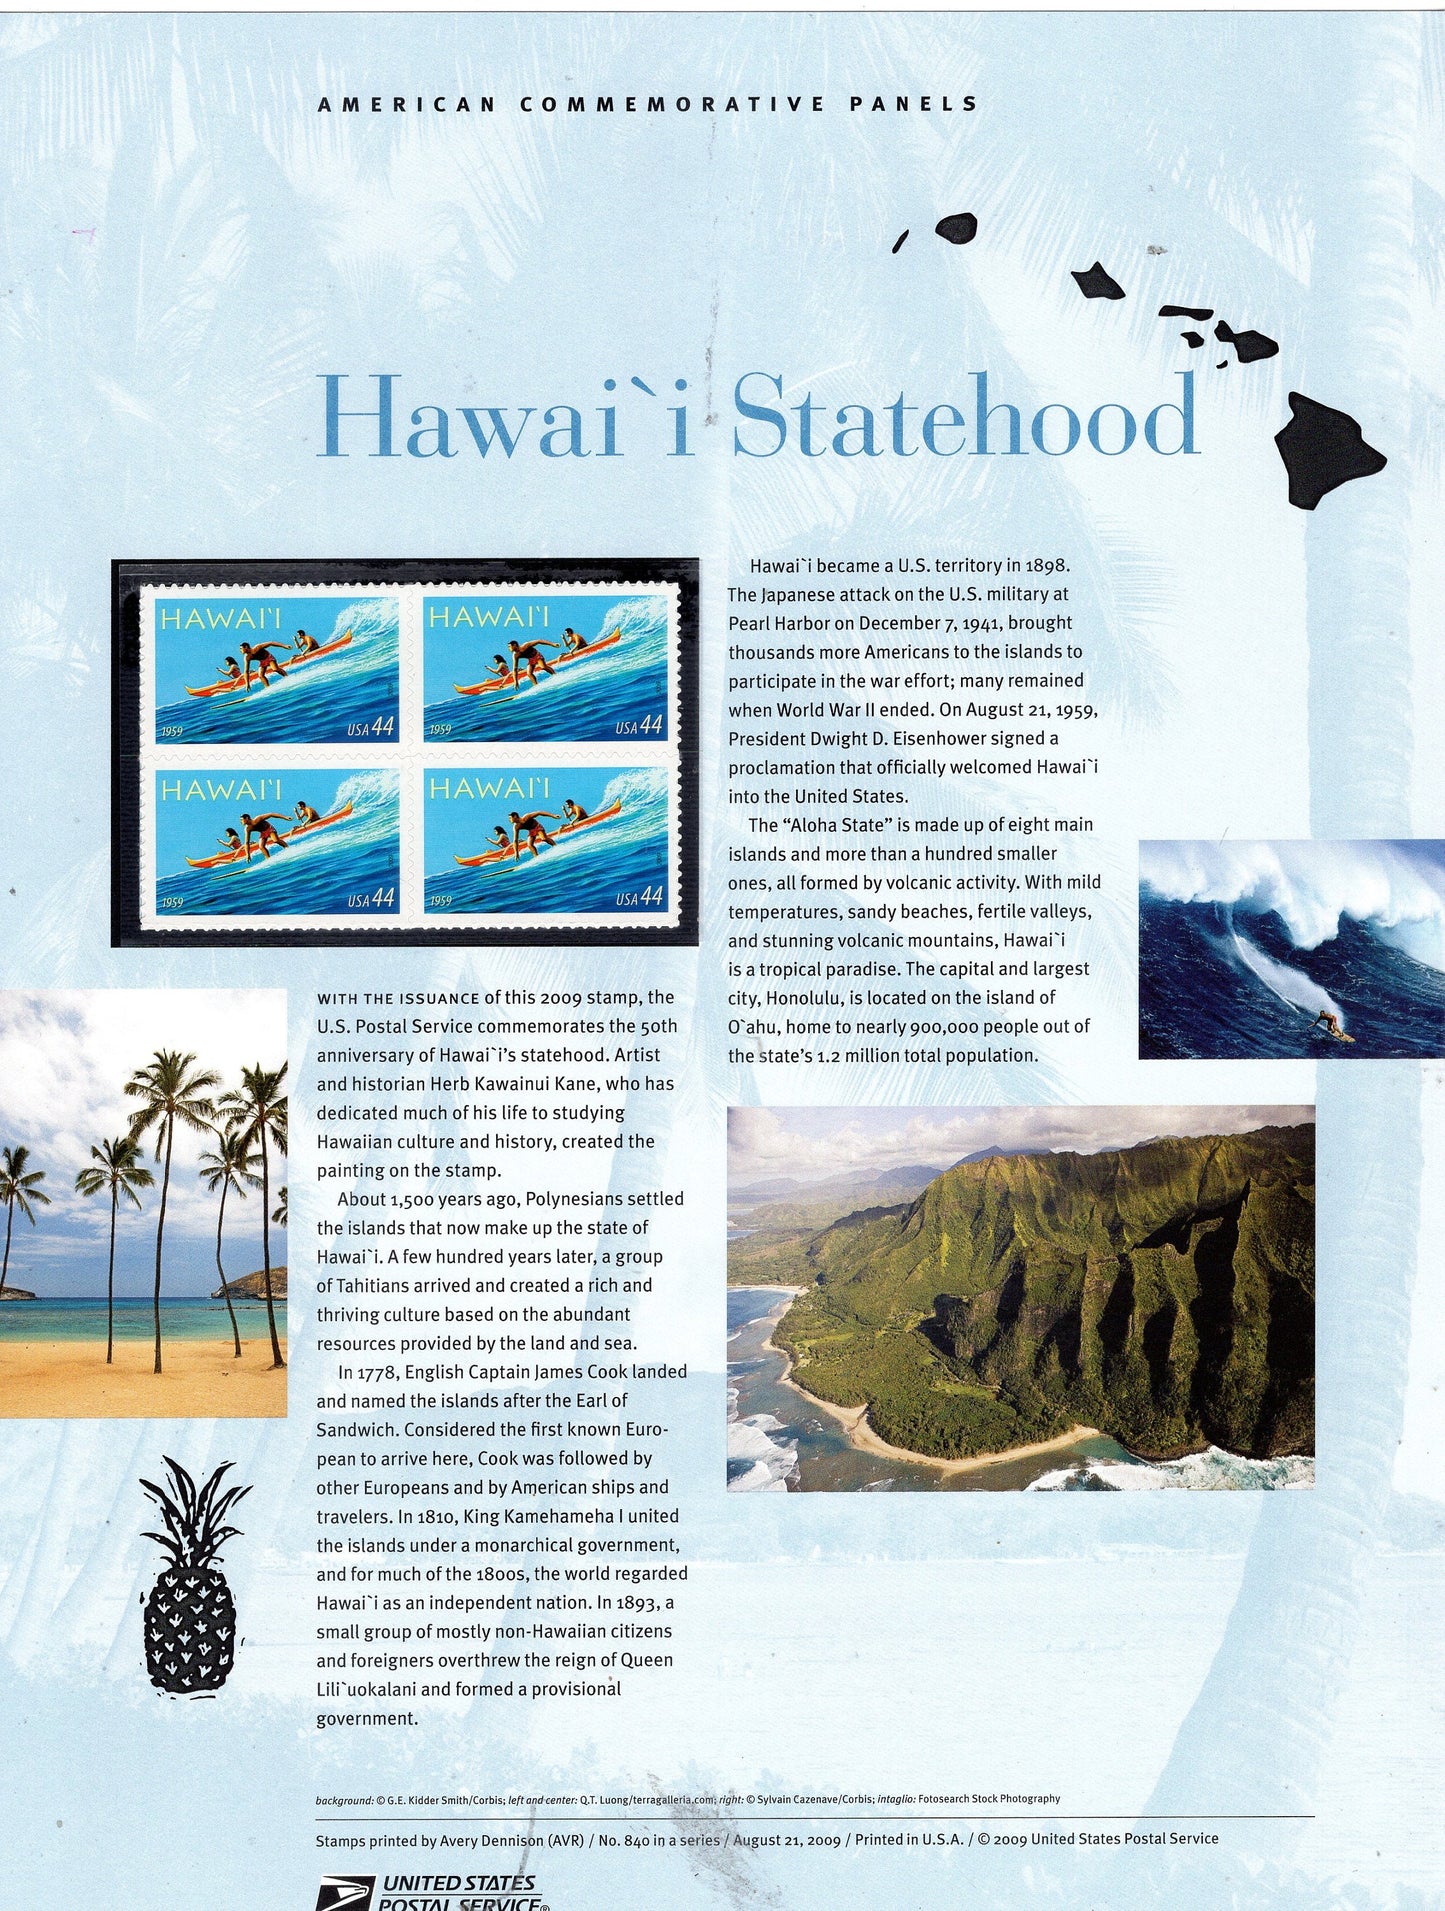 HAWAII SURFER SURFING Statehood Aloha Kamehameha Commemorative Panel with a 4 Stamps Illustrations plus Text – A Great Gift 8.5x11 - 2009 -